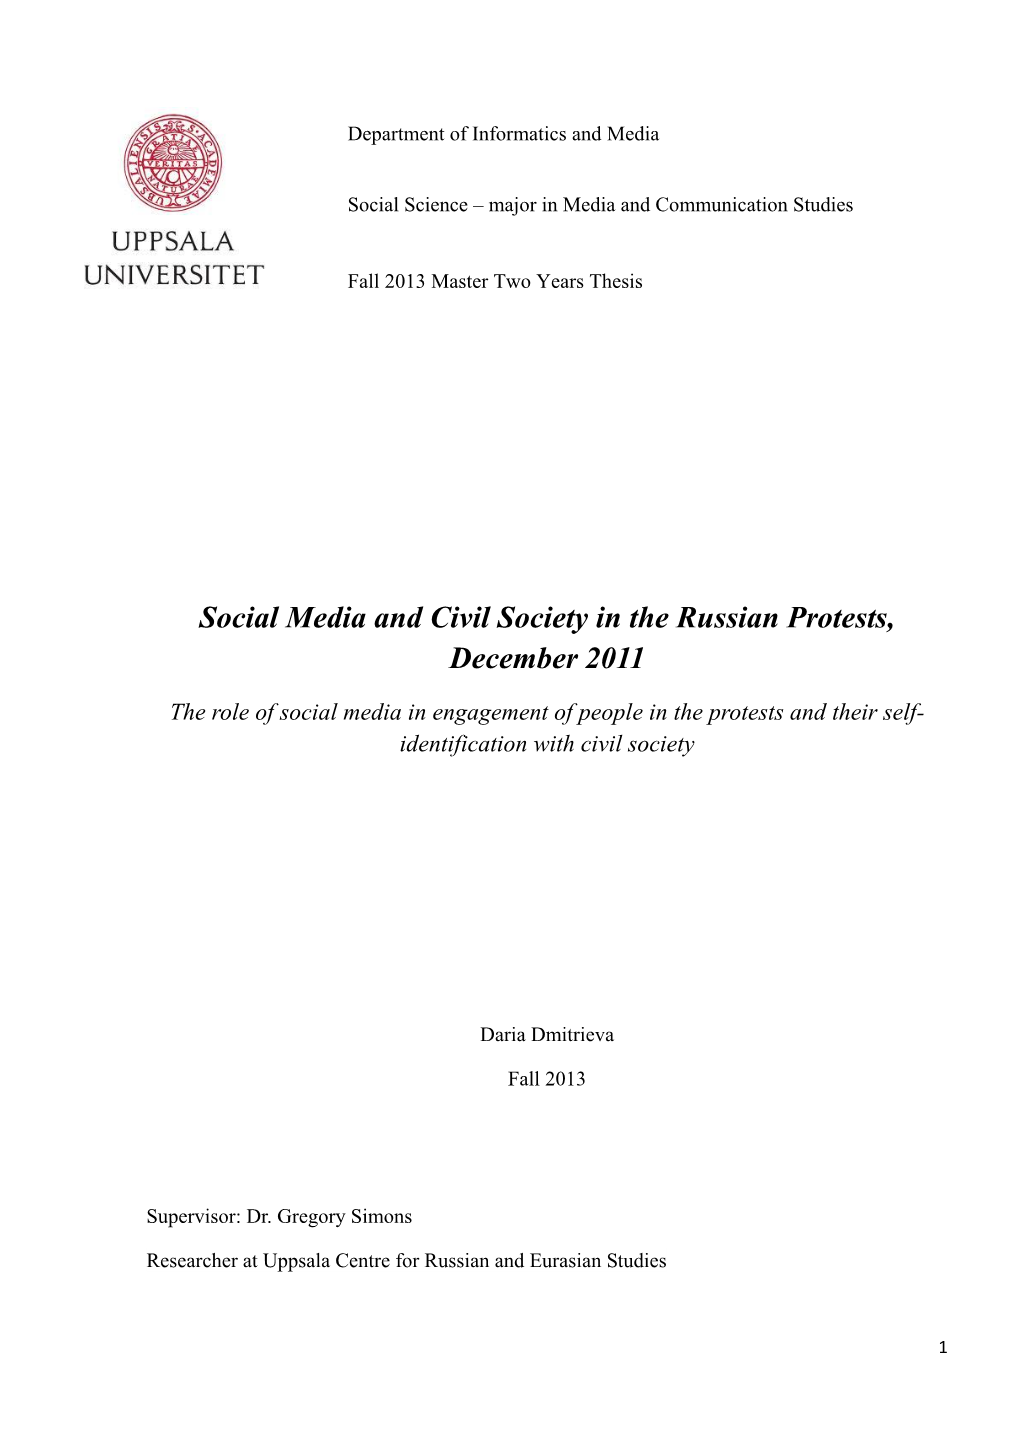 Social Media and Civil Society in the Russian Protests, December 2011